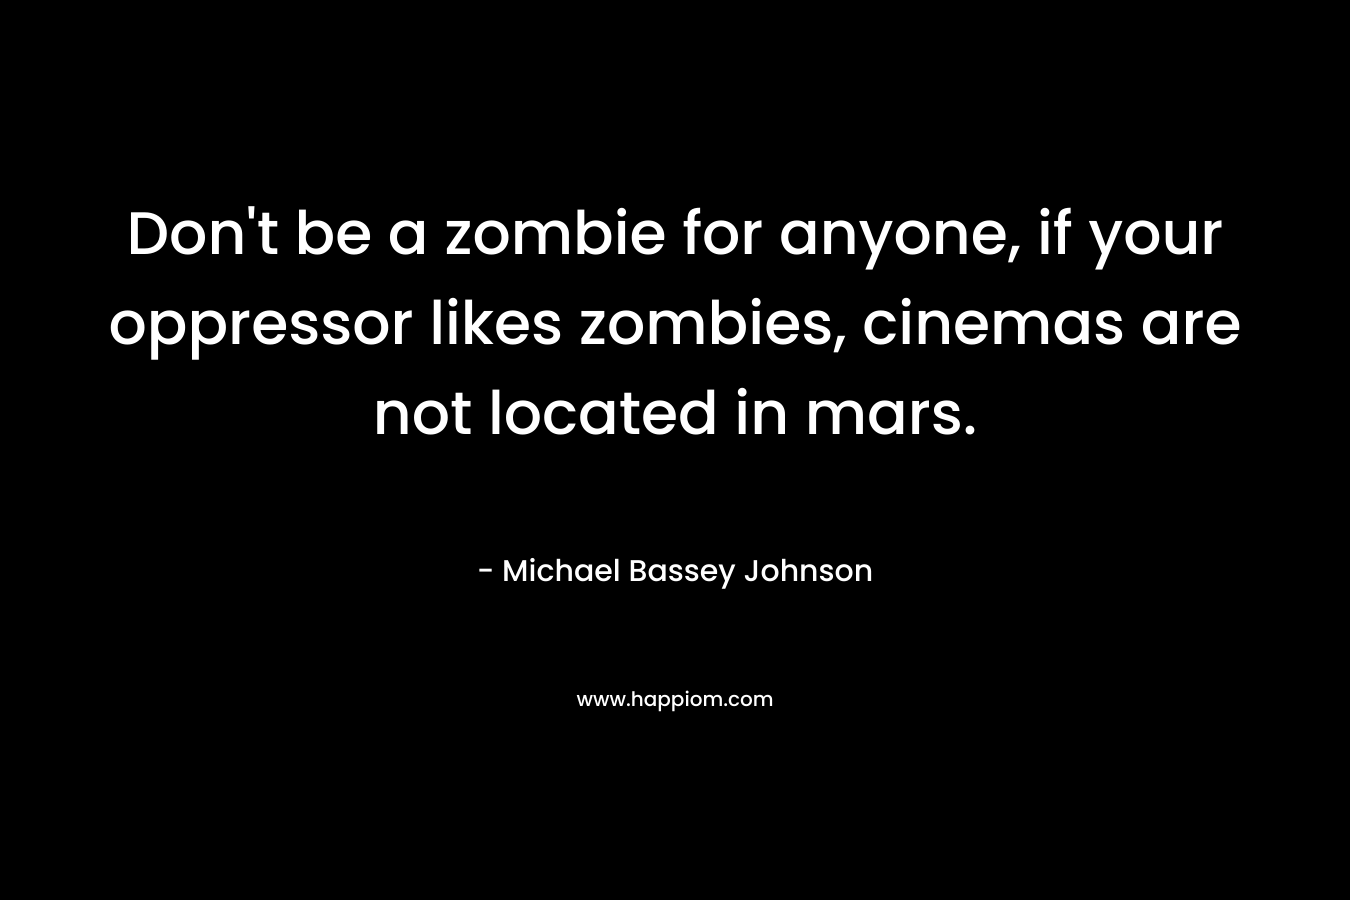 Don't be a zombie for anyone, if your oppressor likes zombies, cinemas are not located in mars.